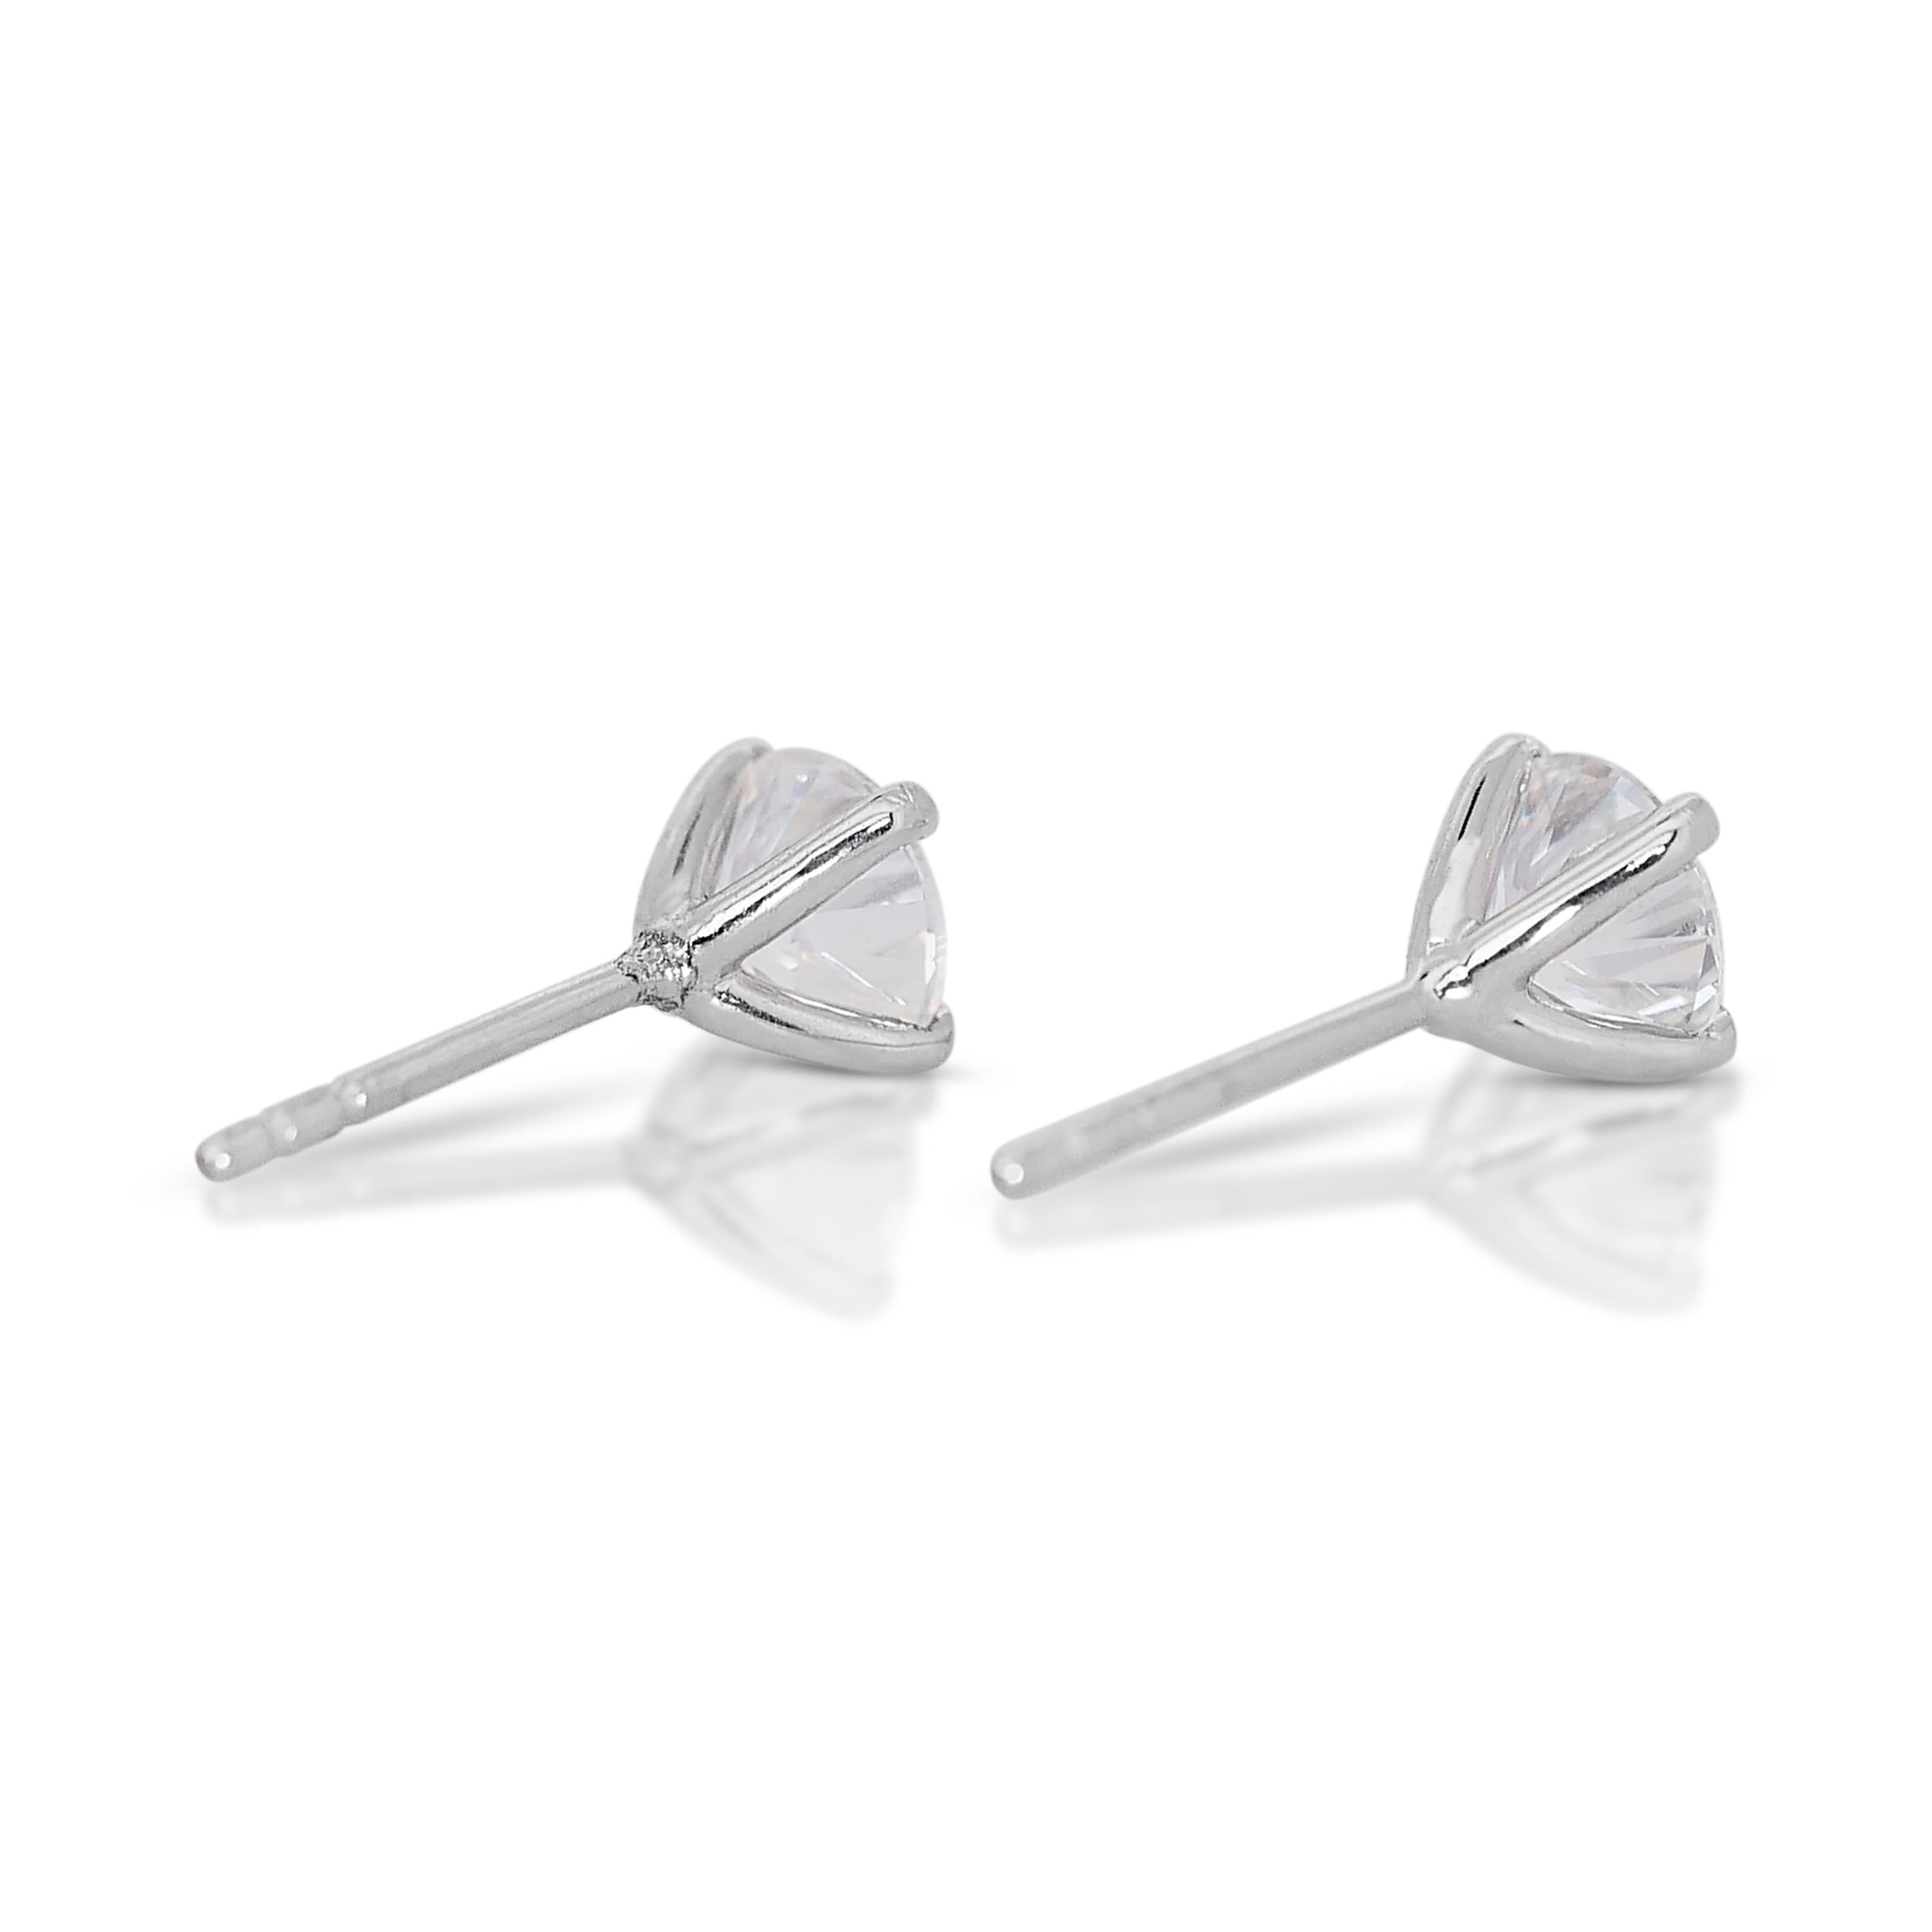 Gleaming 18K White Gold Diamond Stud Earrings with 1.8ct- GIA Certified For Sale 4